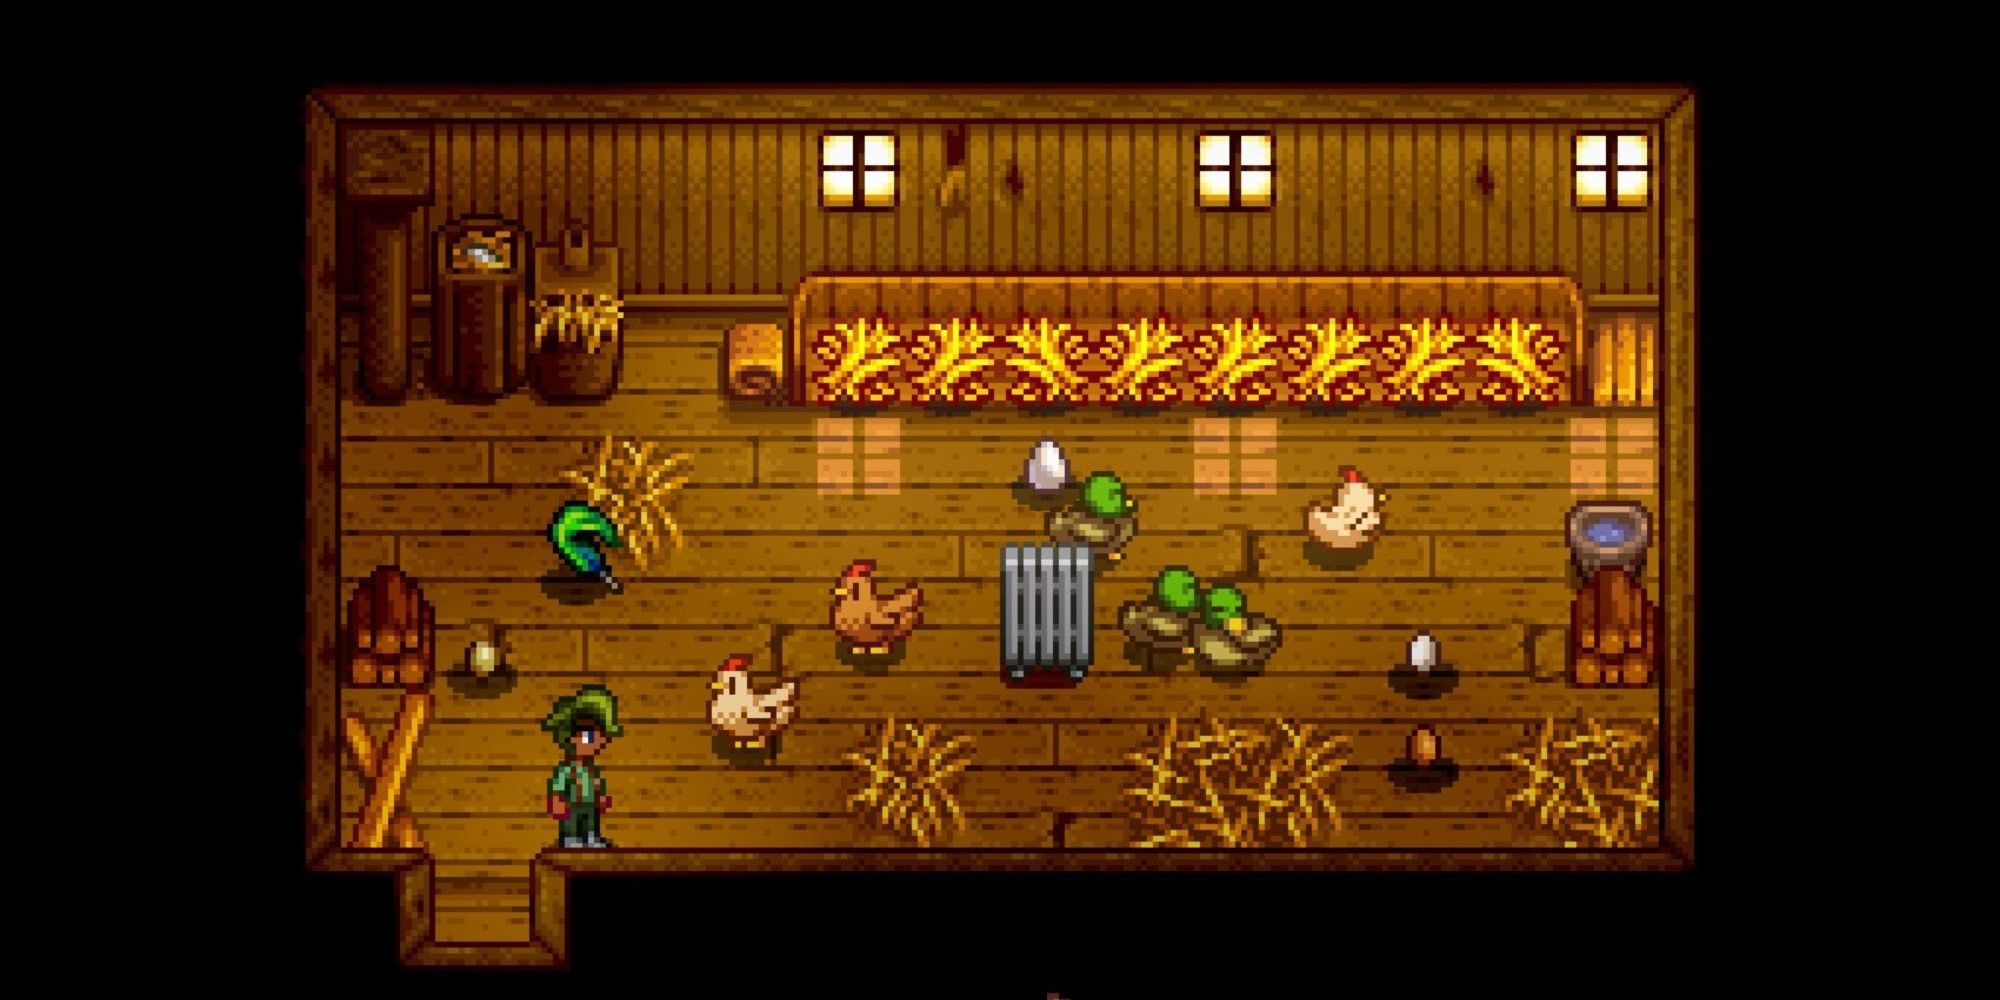 player standing in coop with ducks and chickens